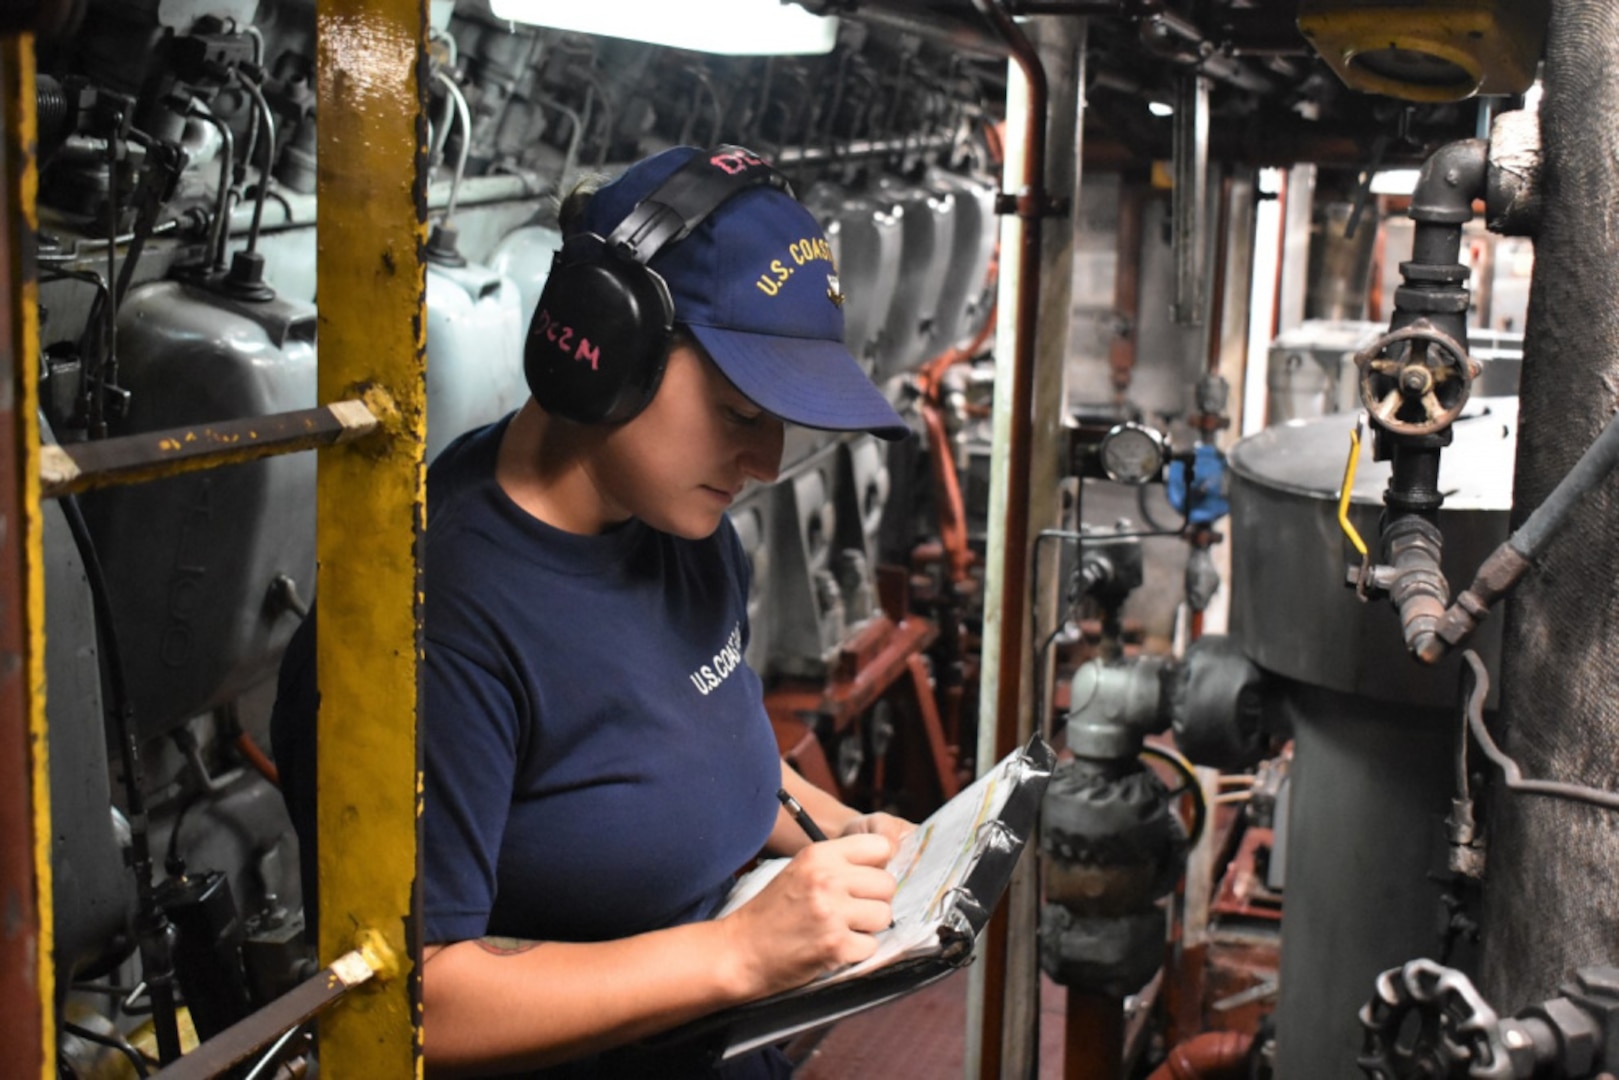 Petty Officer 2nd Class Allison Matthews, a damage controlman, aboard USCGC Resolute (WMEC 620) conducts a throttle round in the engineroom at sea on Aug. 27, 2020.